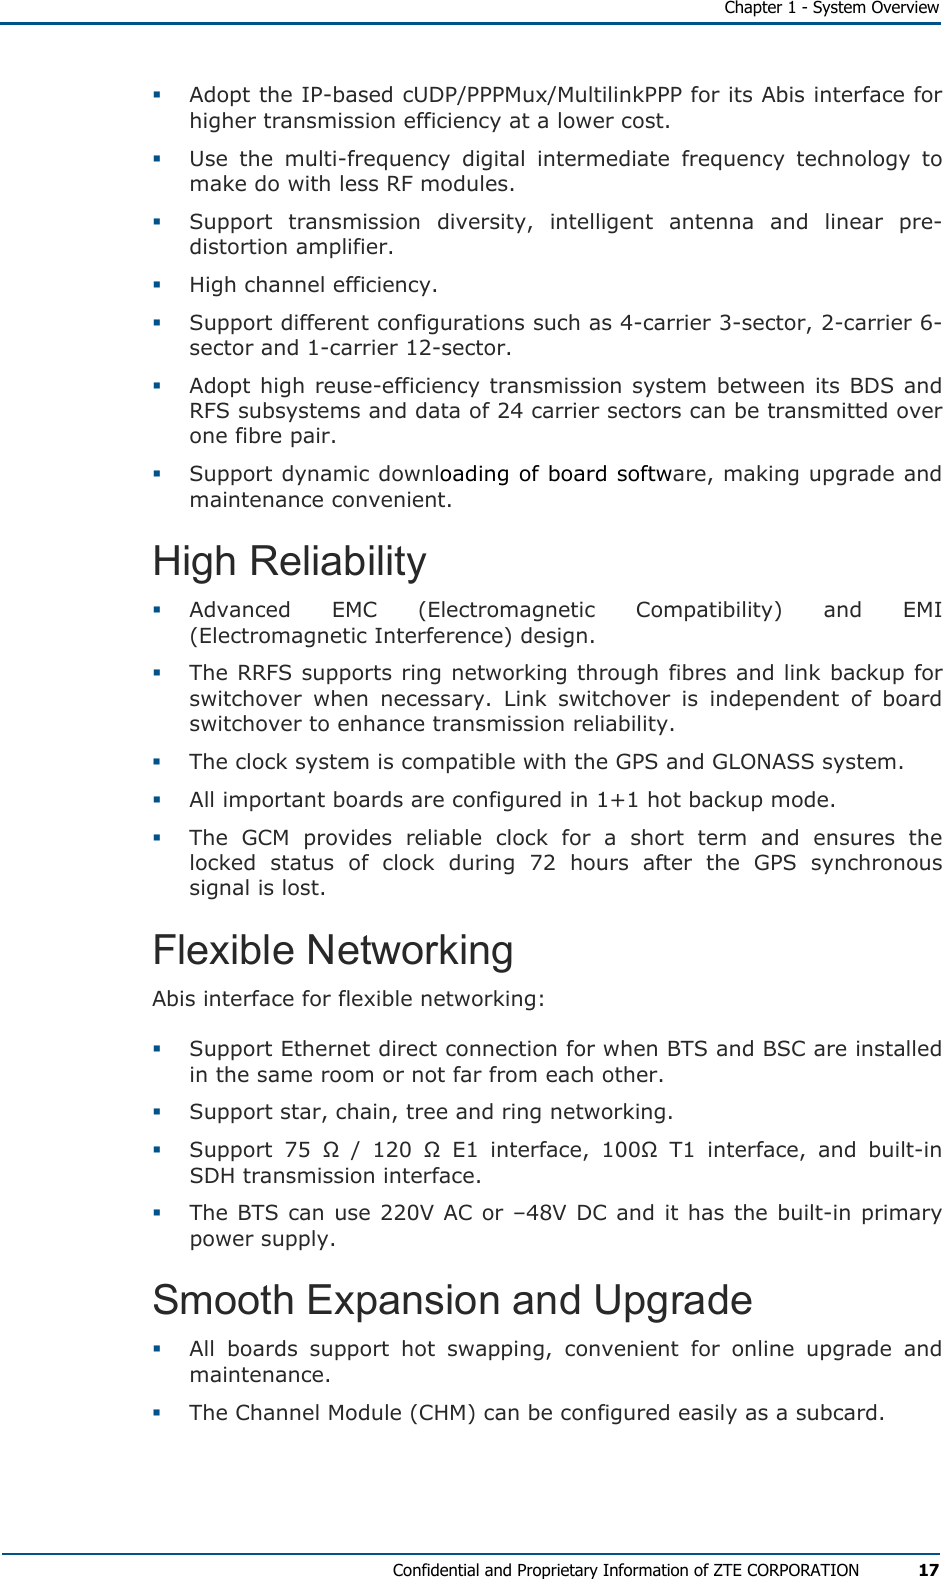   Chapter 1 - System Overview Confidential and Proprietary Information of ZTE CORPORATION 17   Adopt the IP-based cUDP/PPPMux/MultilinkPPP for its Abis interface for higher transmission efficiency at a lower cost.   Use the multi-frequency digital intermediate frequency technology to make do with less RF modules.   Support transmission diversity, intelligent antenna and linear pre-distortion amplifier.    High channel efficiency.    Support different configurations such as 4-carrier 3-sector, 2-carrier 6-sector and 1-carrier 12-sector.    Adopt high reuse-efficiency transmission system between its BDS and RFS subsystems and data of 24 carrier sectors can be transmitted over one fibre pair.    Support dynamic downloading of board software, making upgrade and maintenance convenient. High Reliability   Advanced EMC (Electromagnetic Compatibility) and EMI (Electromagnetic Interference) design.    The RRFS supports ring networking through fibres and link backup for switchover when necessary. Link switchover is independent of board switchover to enhance transmission reliability.    The clock system is compatible with the GPS and GLONASS system.   All important boards are configured in 1+1 hot backup mode.   The GCM provides reliable clock for a short term and ensures the locked status of clock during 72 hours after the GPS synchronous signal is lost. Flexible Networking Abis interface for flexible networking:   Support Ethernet direct connection for when BTS and BSC are installed in the same room or not far from each other.    Support star, chain, tree and ring networking.   Support 75 Ω / 120 Ω E1 interface, 100Ω T1 interface, and built-in SDH transmission interface.   The BTS can use 220V AC or –48V DC and it has the built-in primary power supply. Smooth Expansion and Upgrade   All boards support hot swapping, convenient for online upgrade and maintenance.   The Channel Module (CHM) can be configured easily as a subcard.  